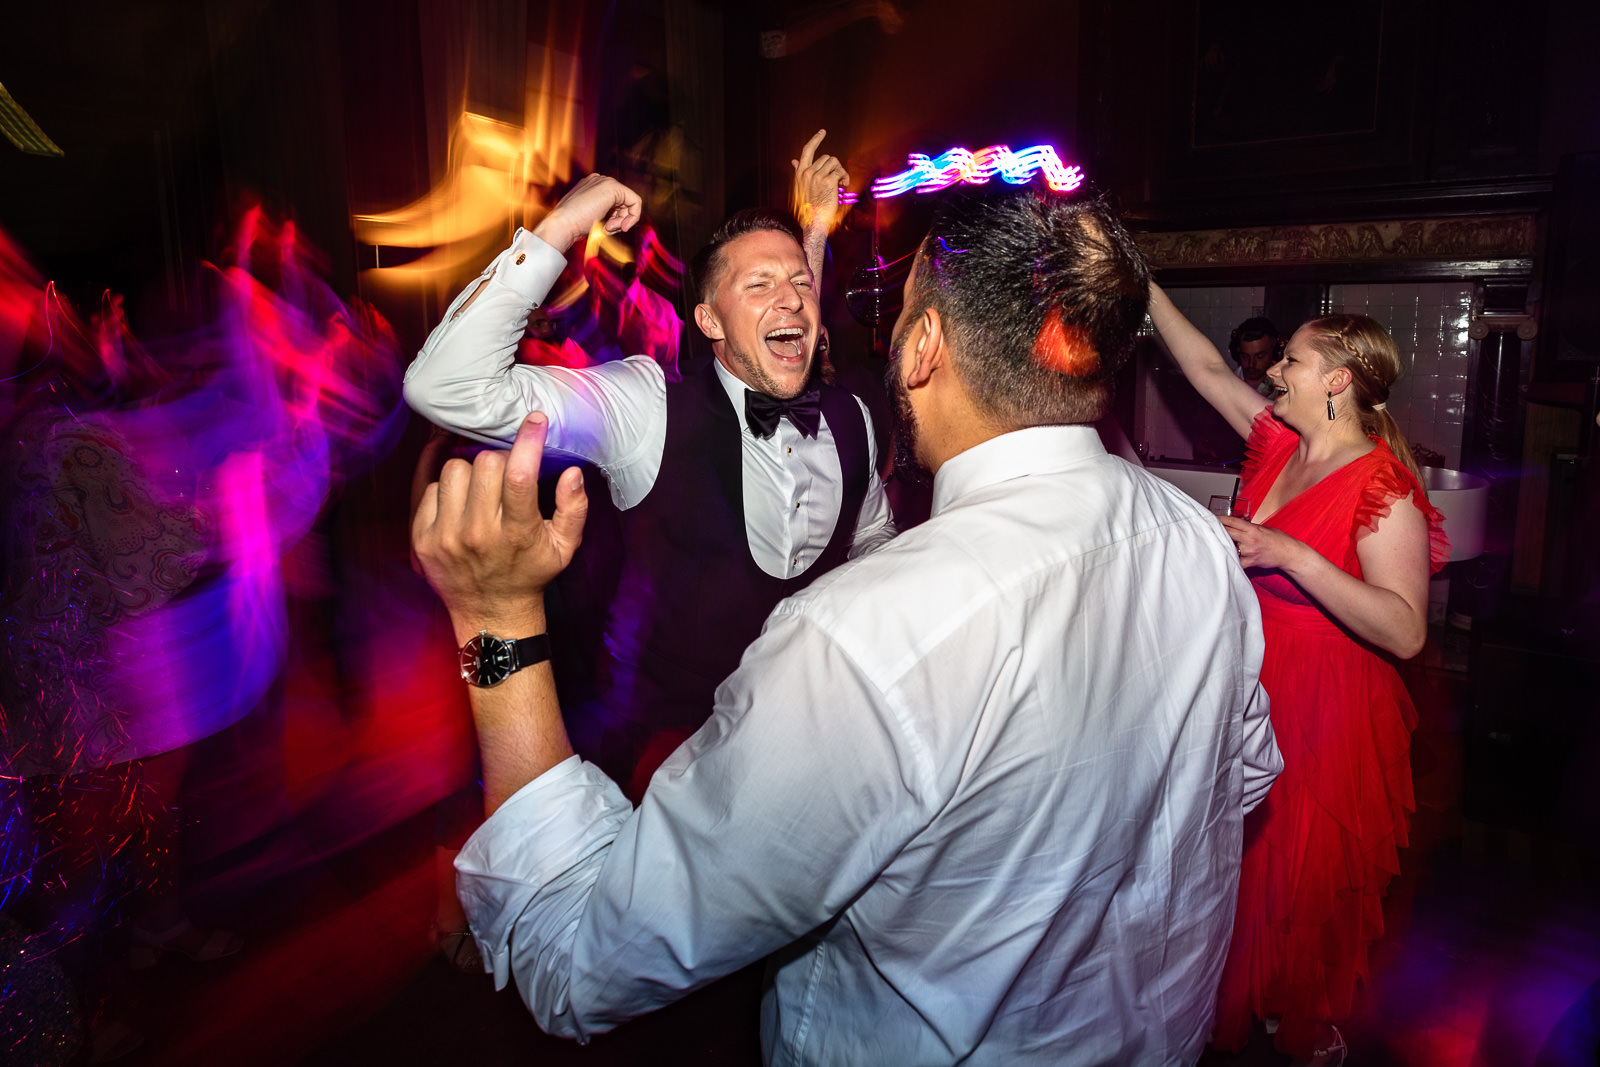 Groom partying hard during same sex wedding party